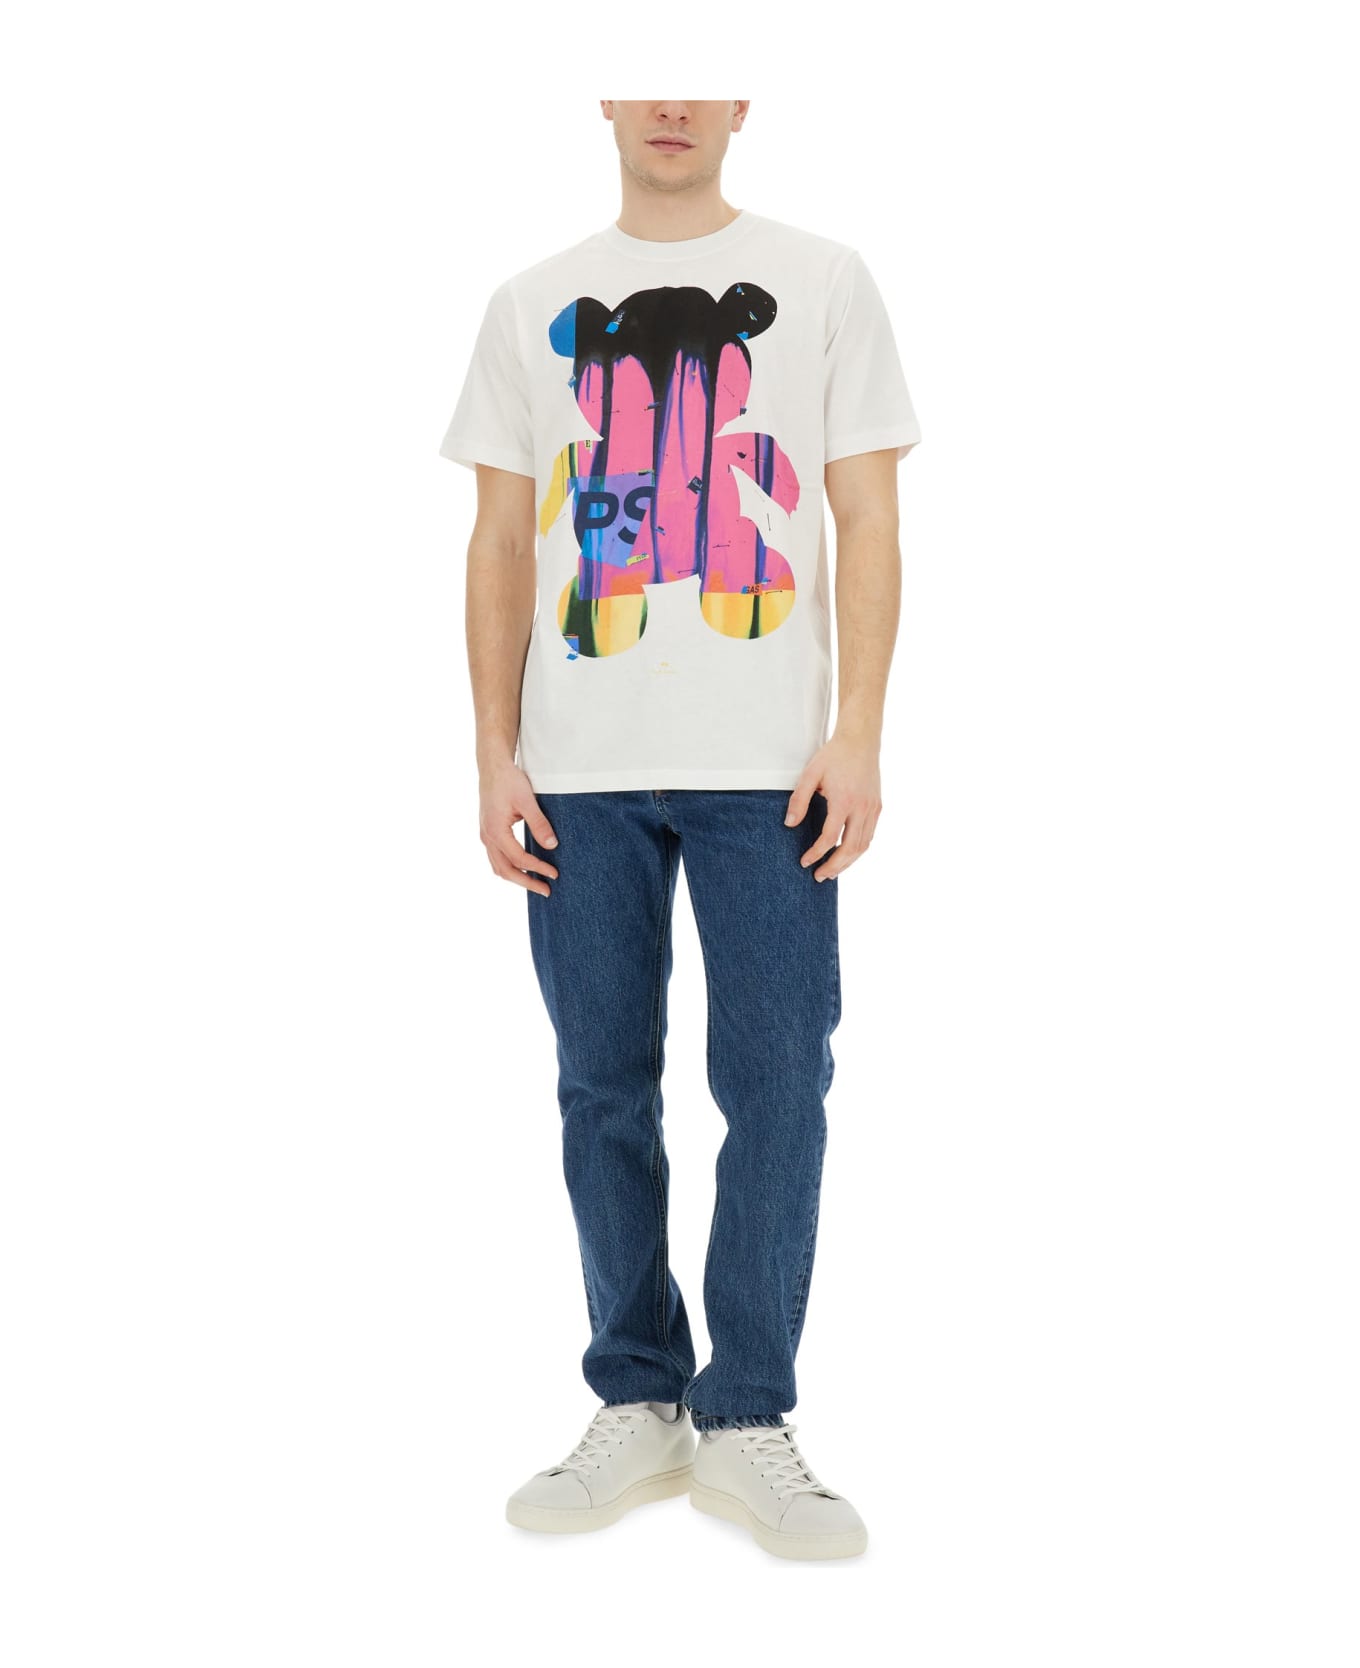 PS by Paul Smith Teddy T-shirt - WHITE